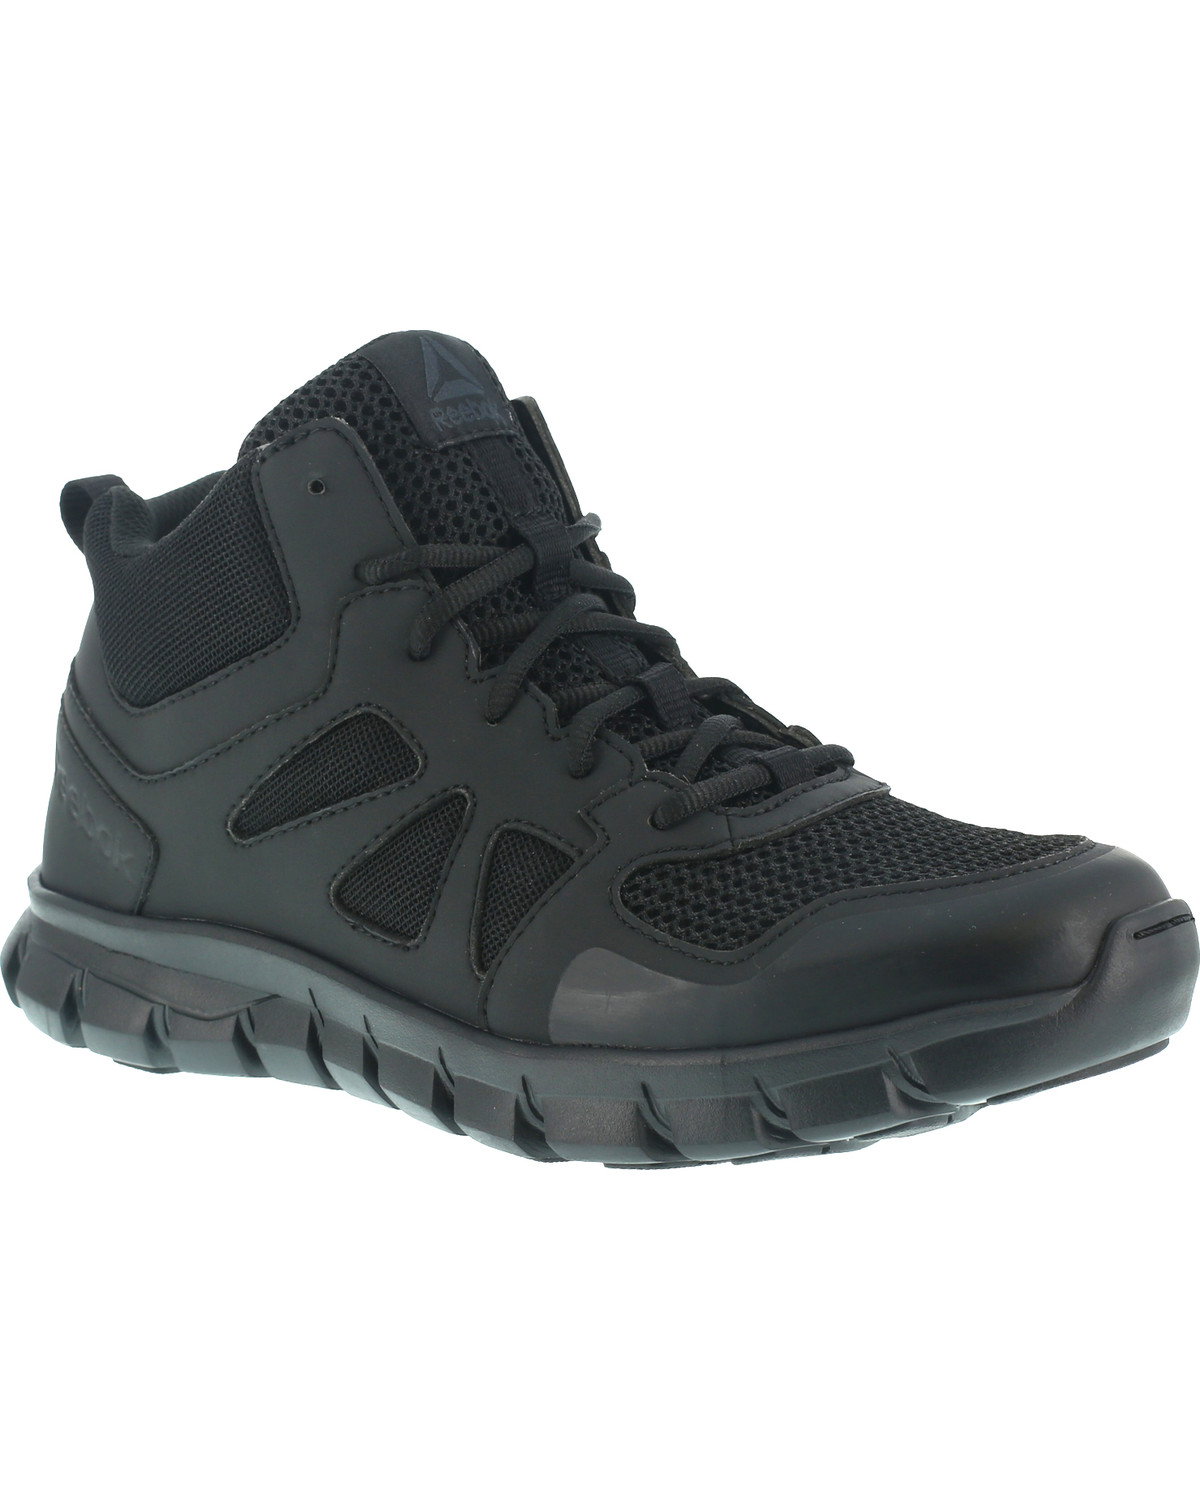 Reebok Women's Sublite Cushion Tactical Mid Boots